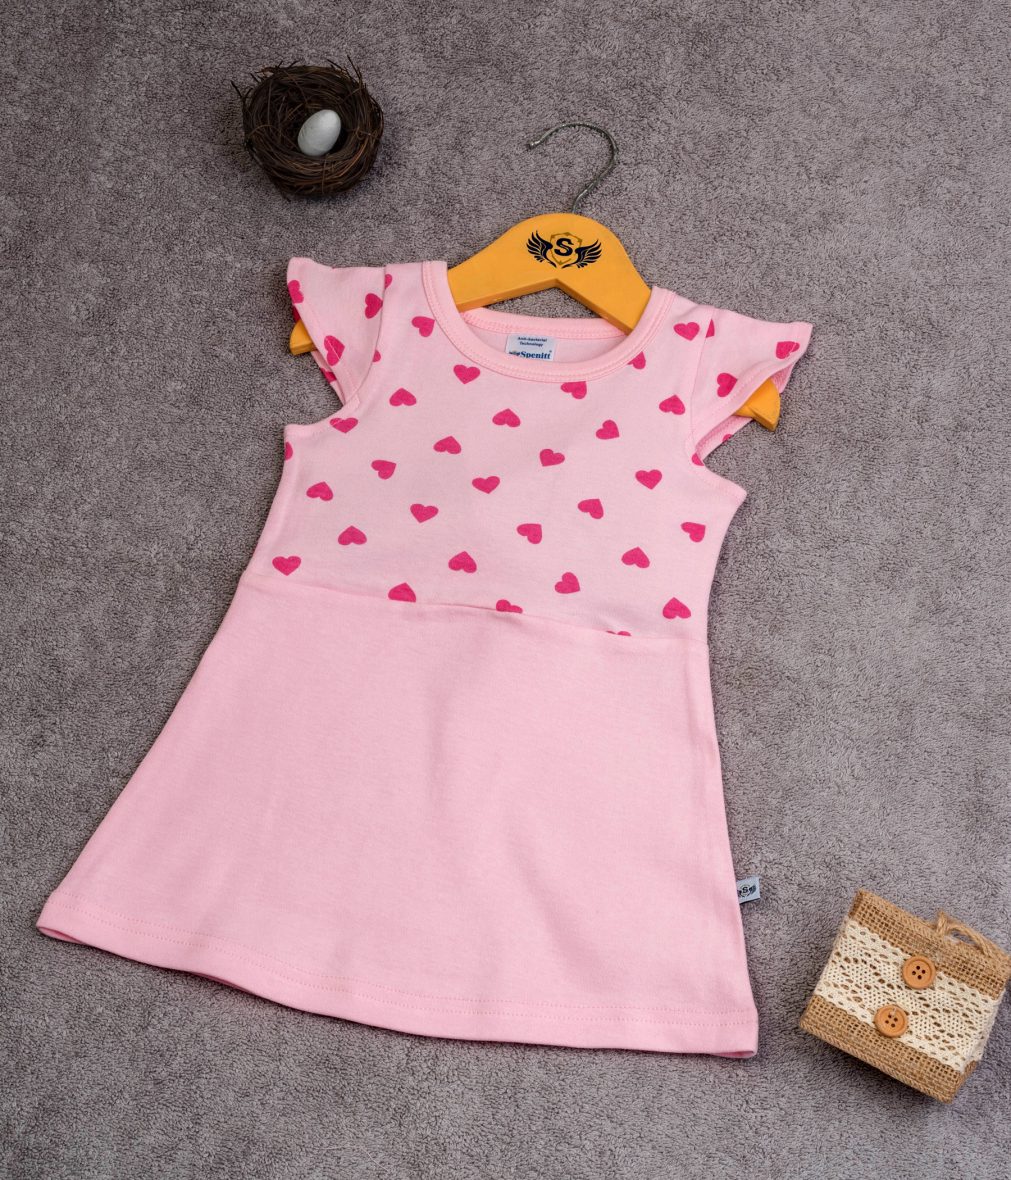 Cap sleeve pink dress for baby girls